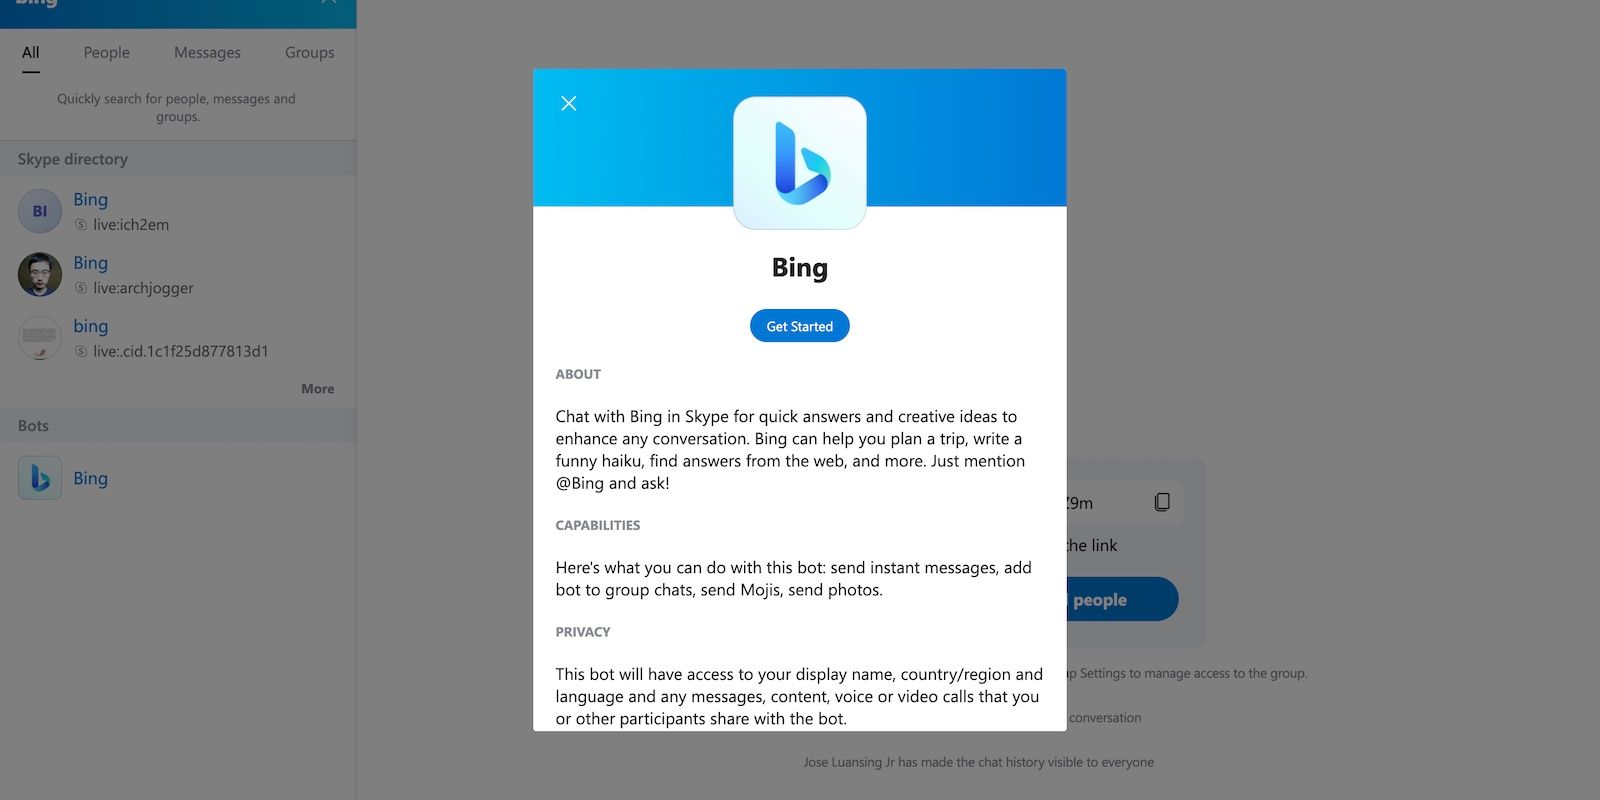 Message Saying You Can Use Bing on Skype